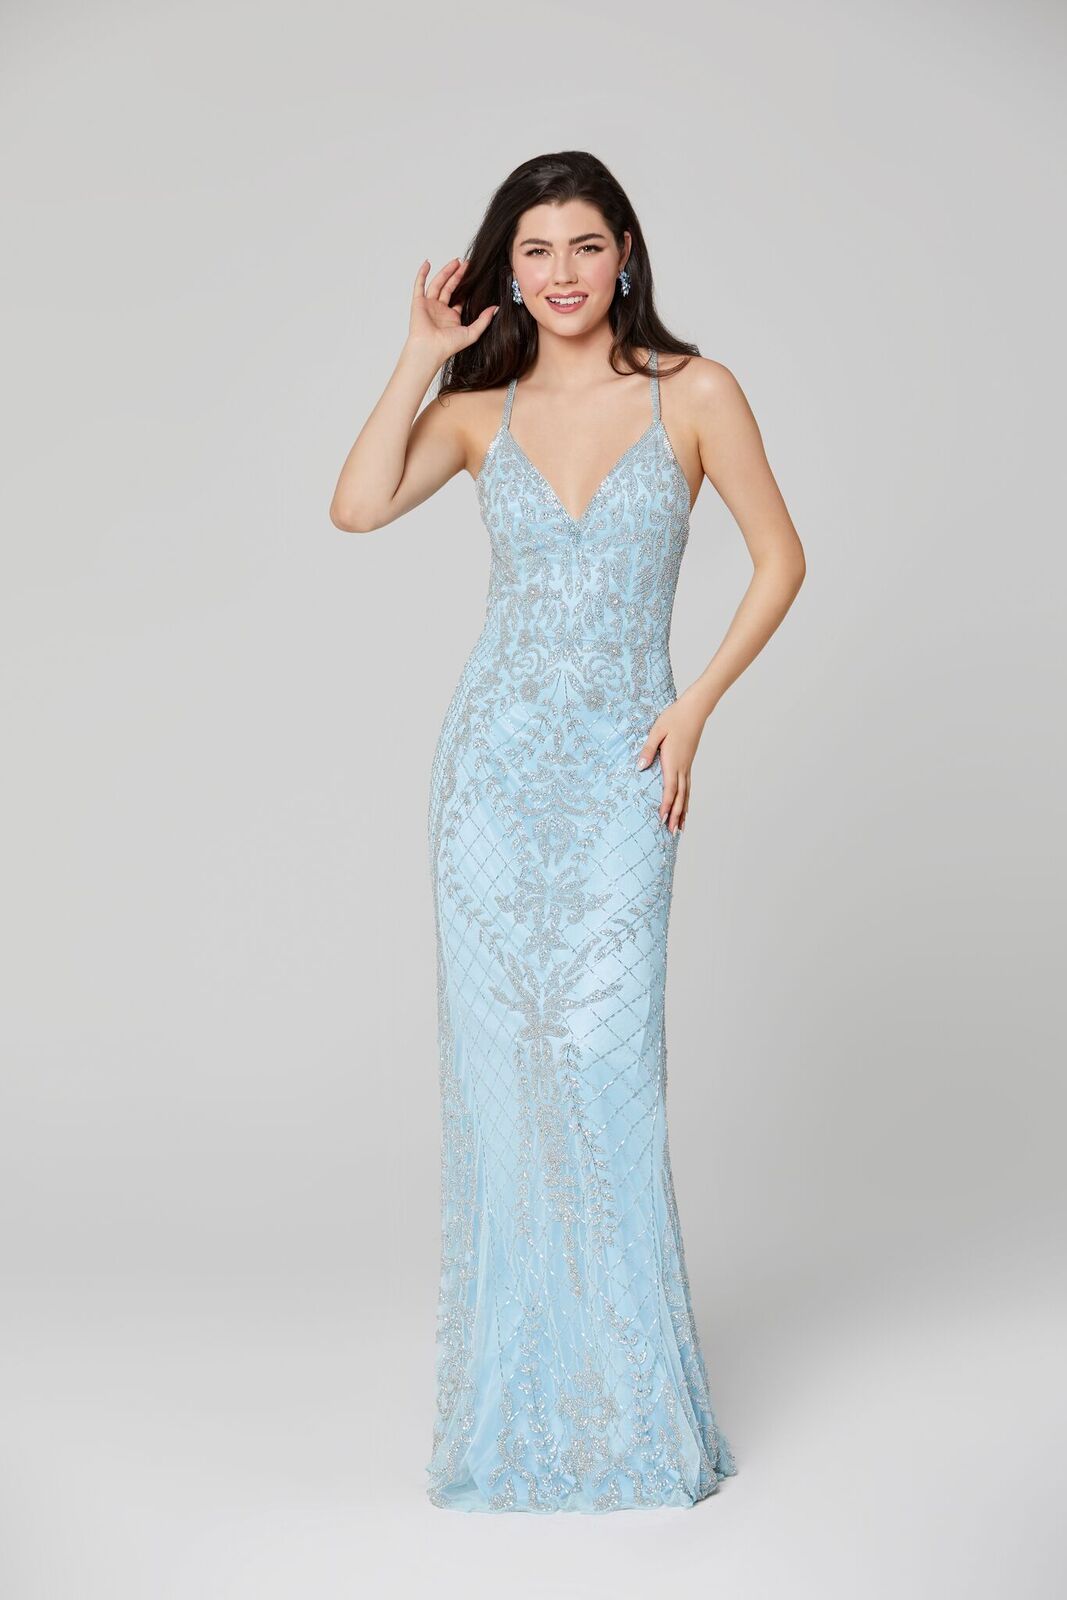 Primavera Couture 3428 is a beaded Prom Dress, Pageant Gown, Wedding Dress & Formal Evening Wear gown. This Gown Features a v neckline with spaghetti straps that criss cross in the open back full long sequin and bead skirt. 